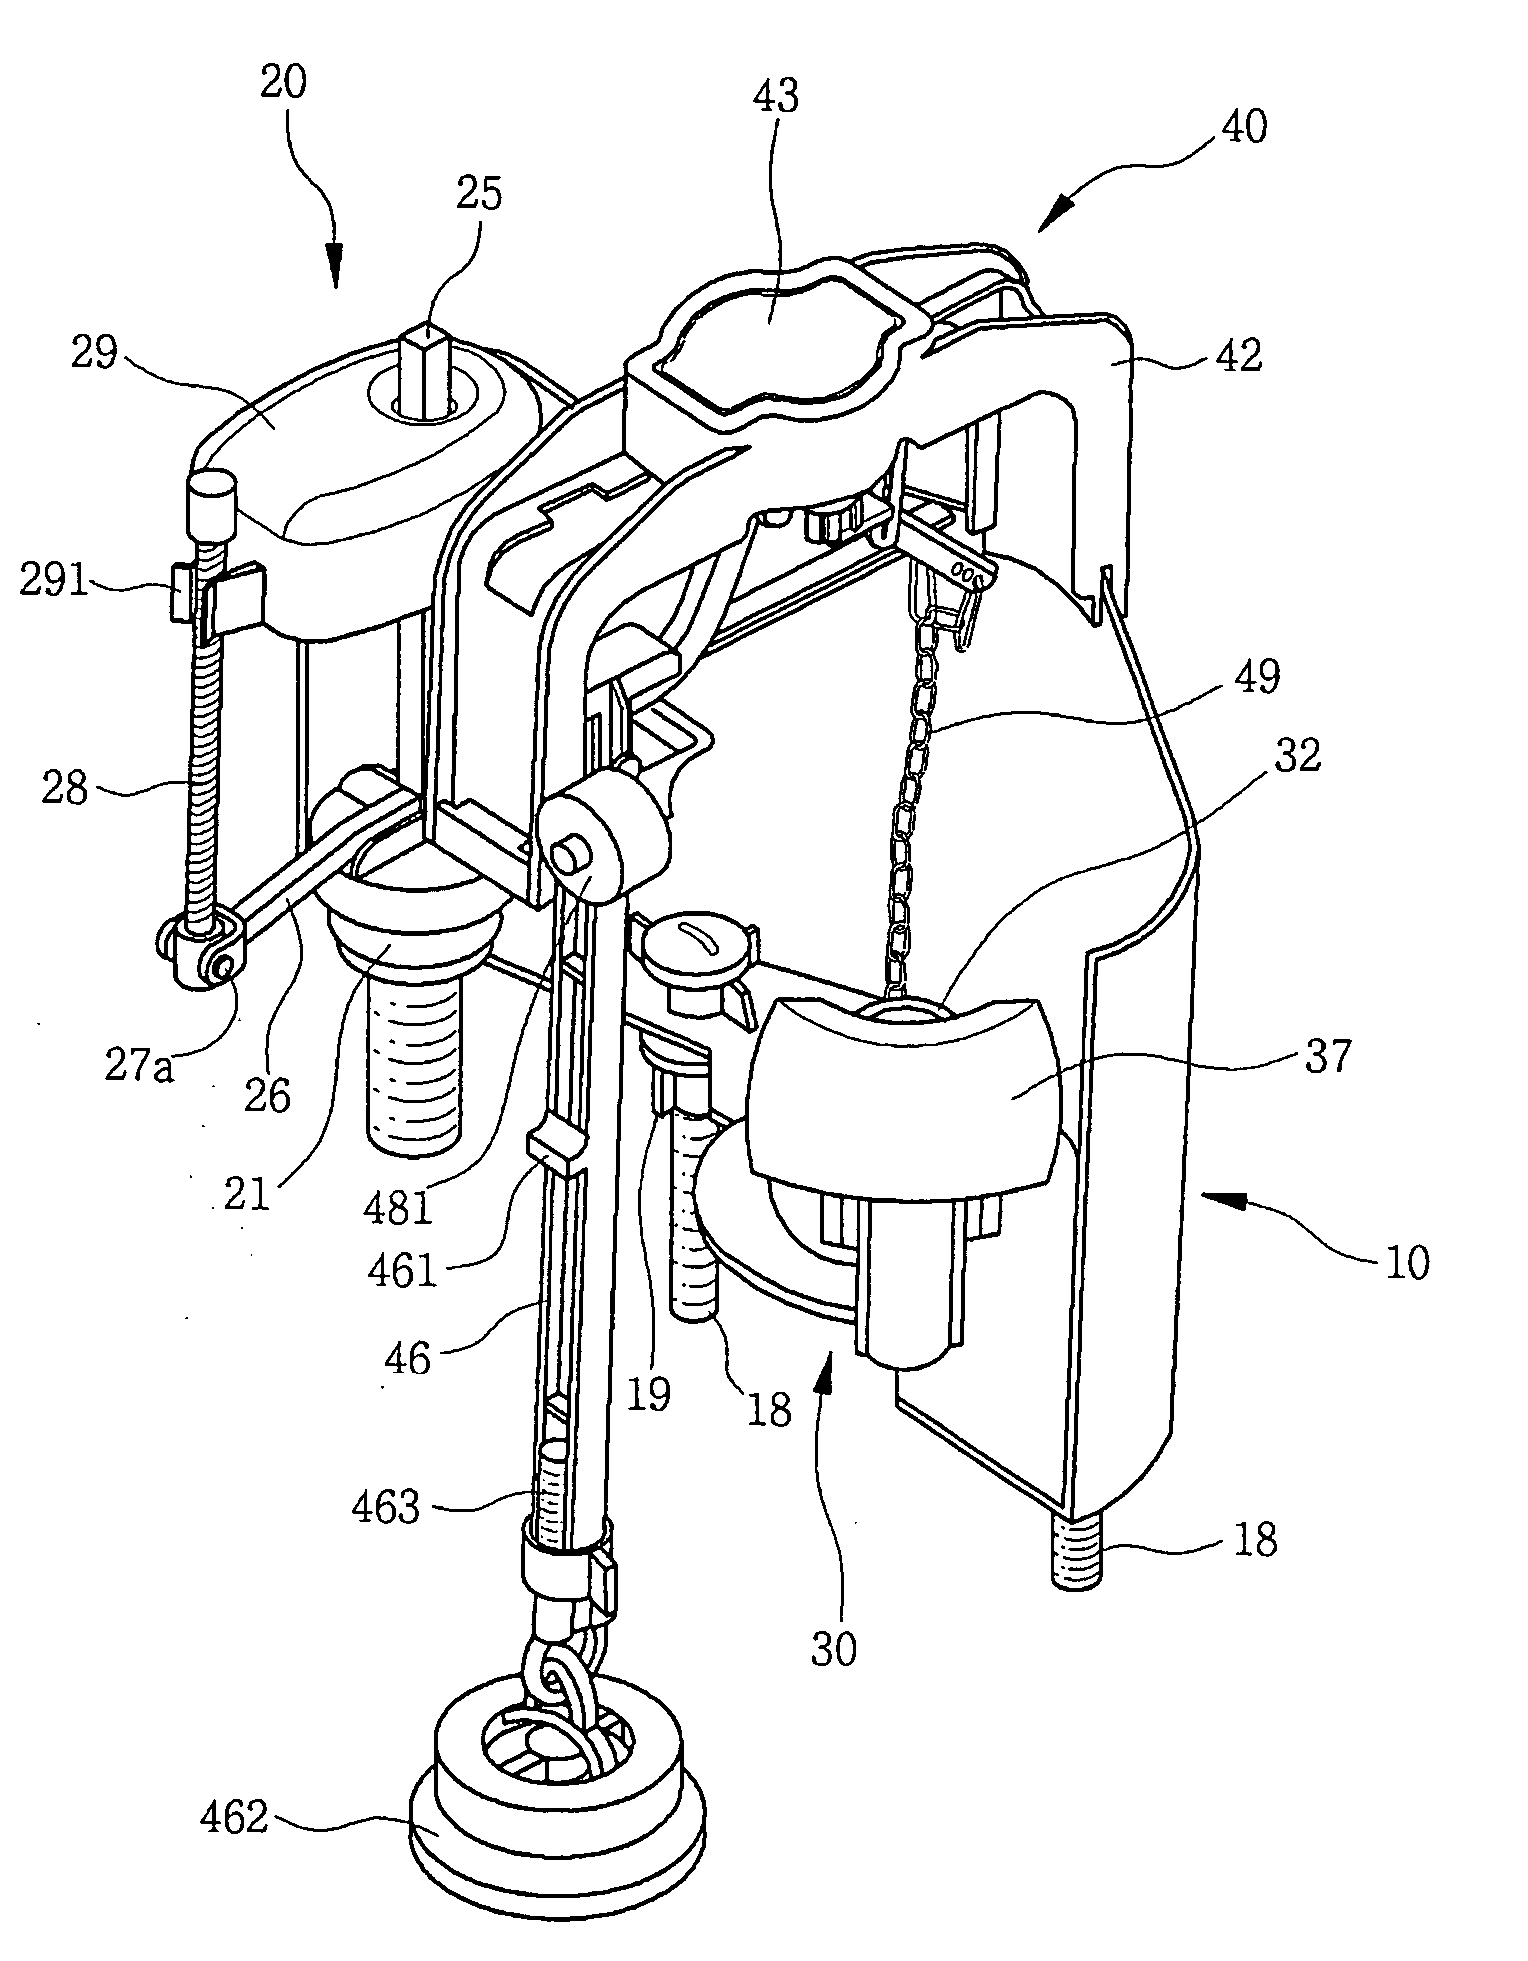 Auxiliary water tank device for toilet stool